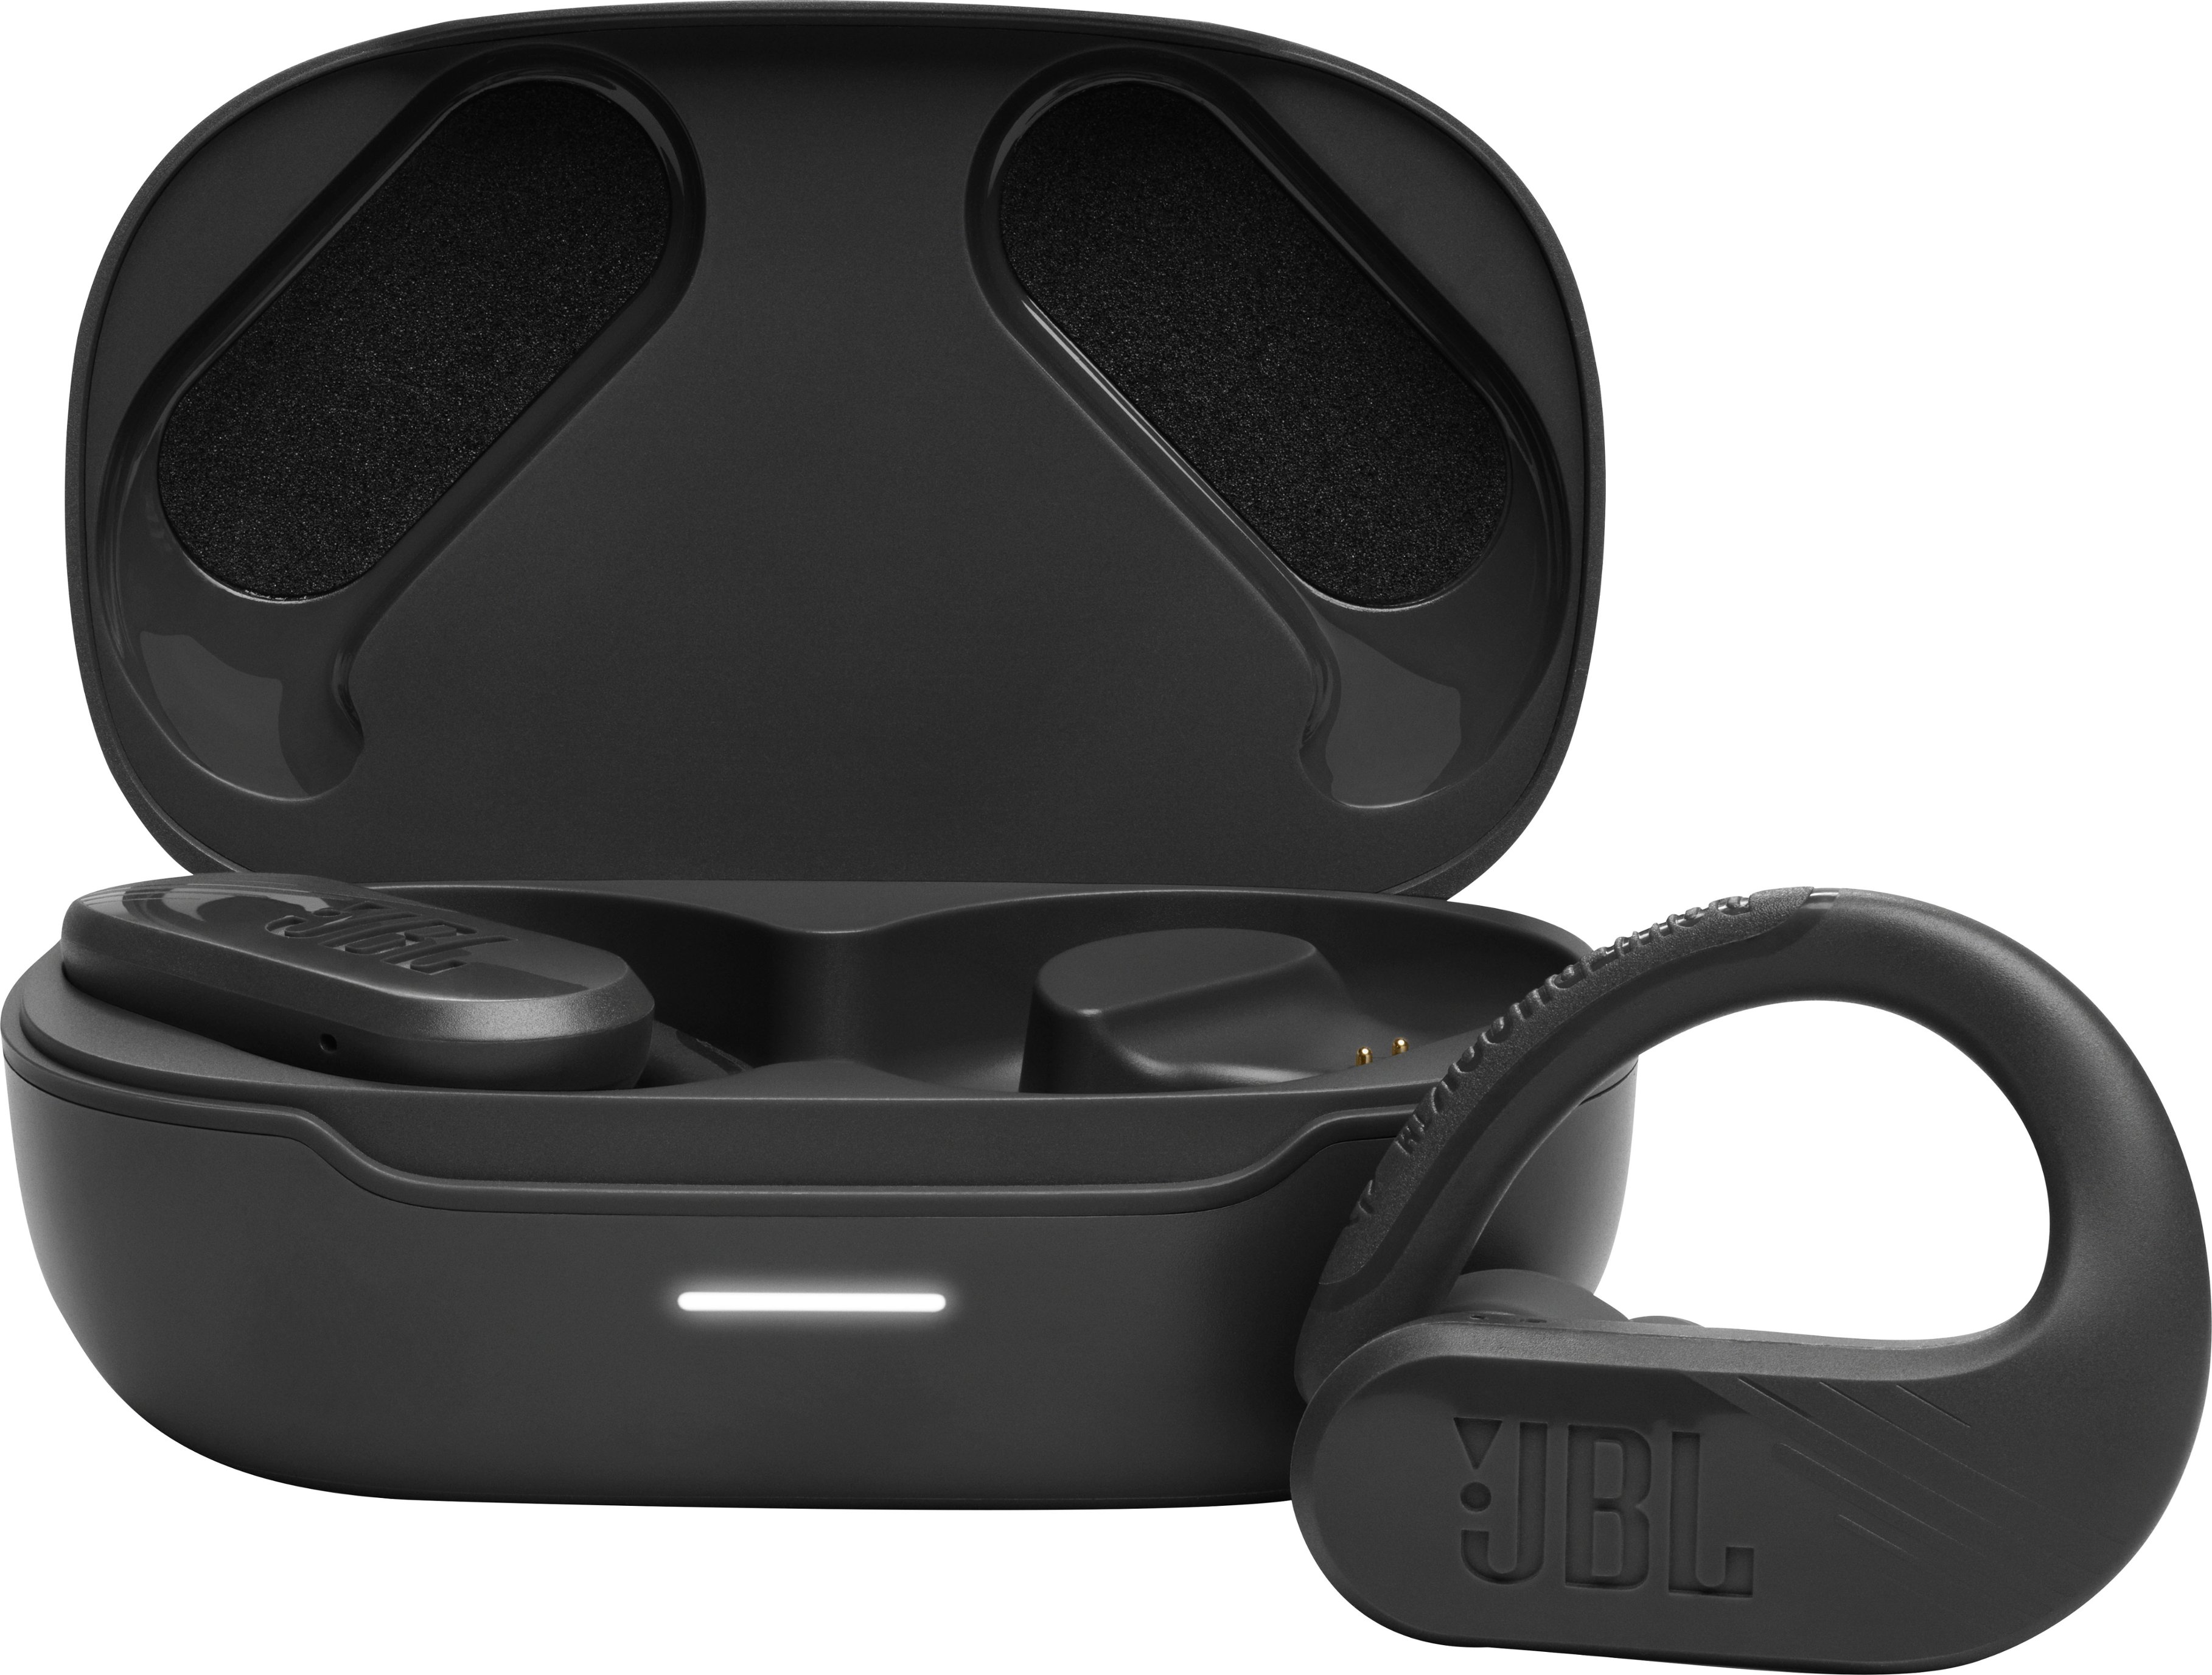 Why These JBL ANC Earbuds Are Great Deal For 50% Off at  - CNET